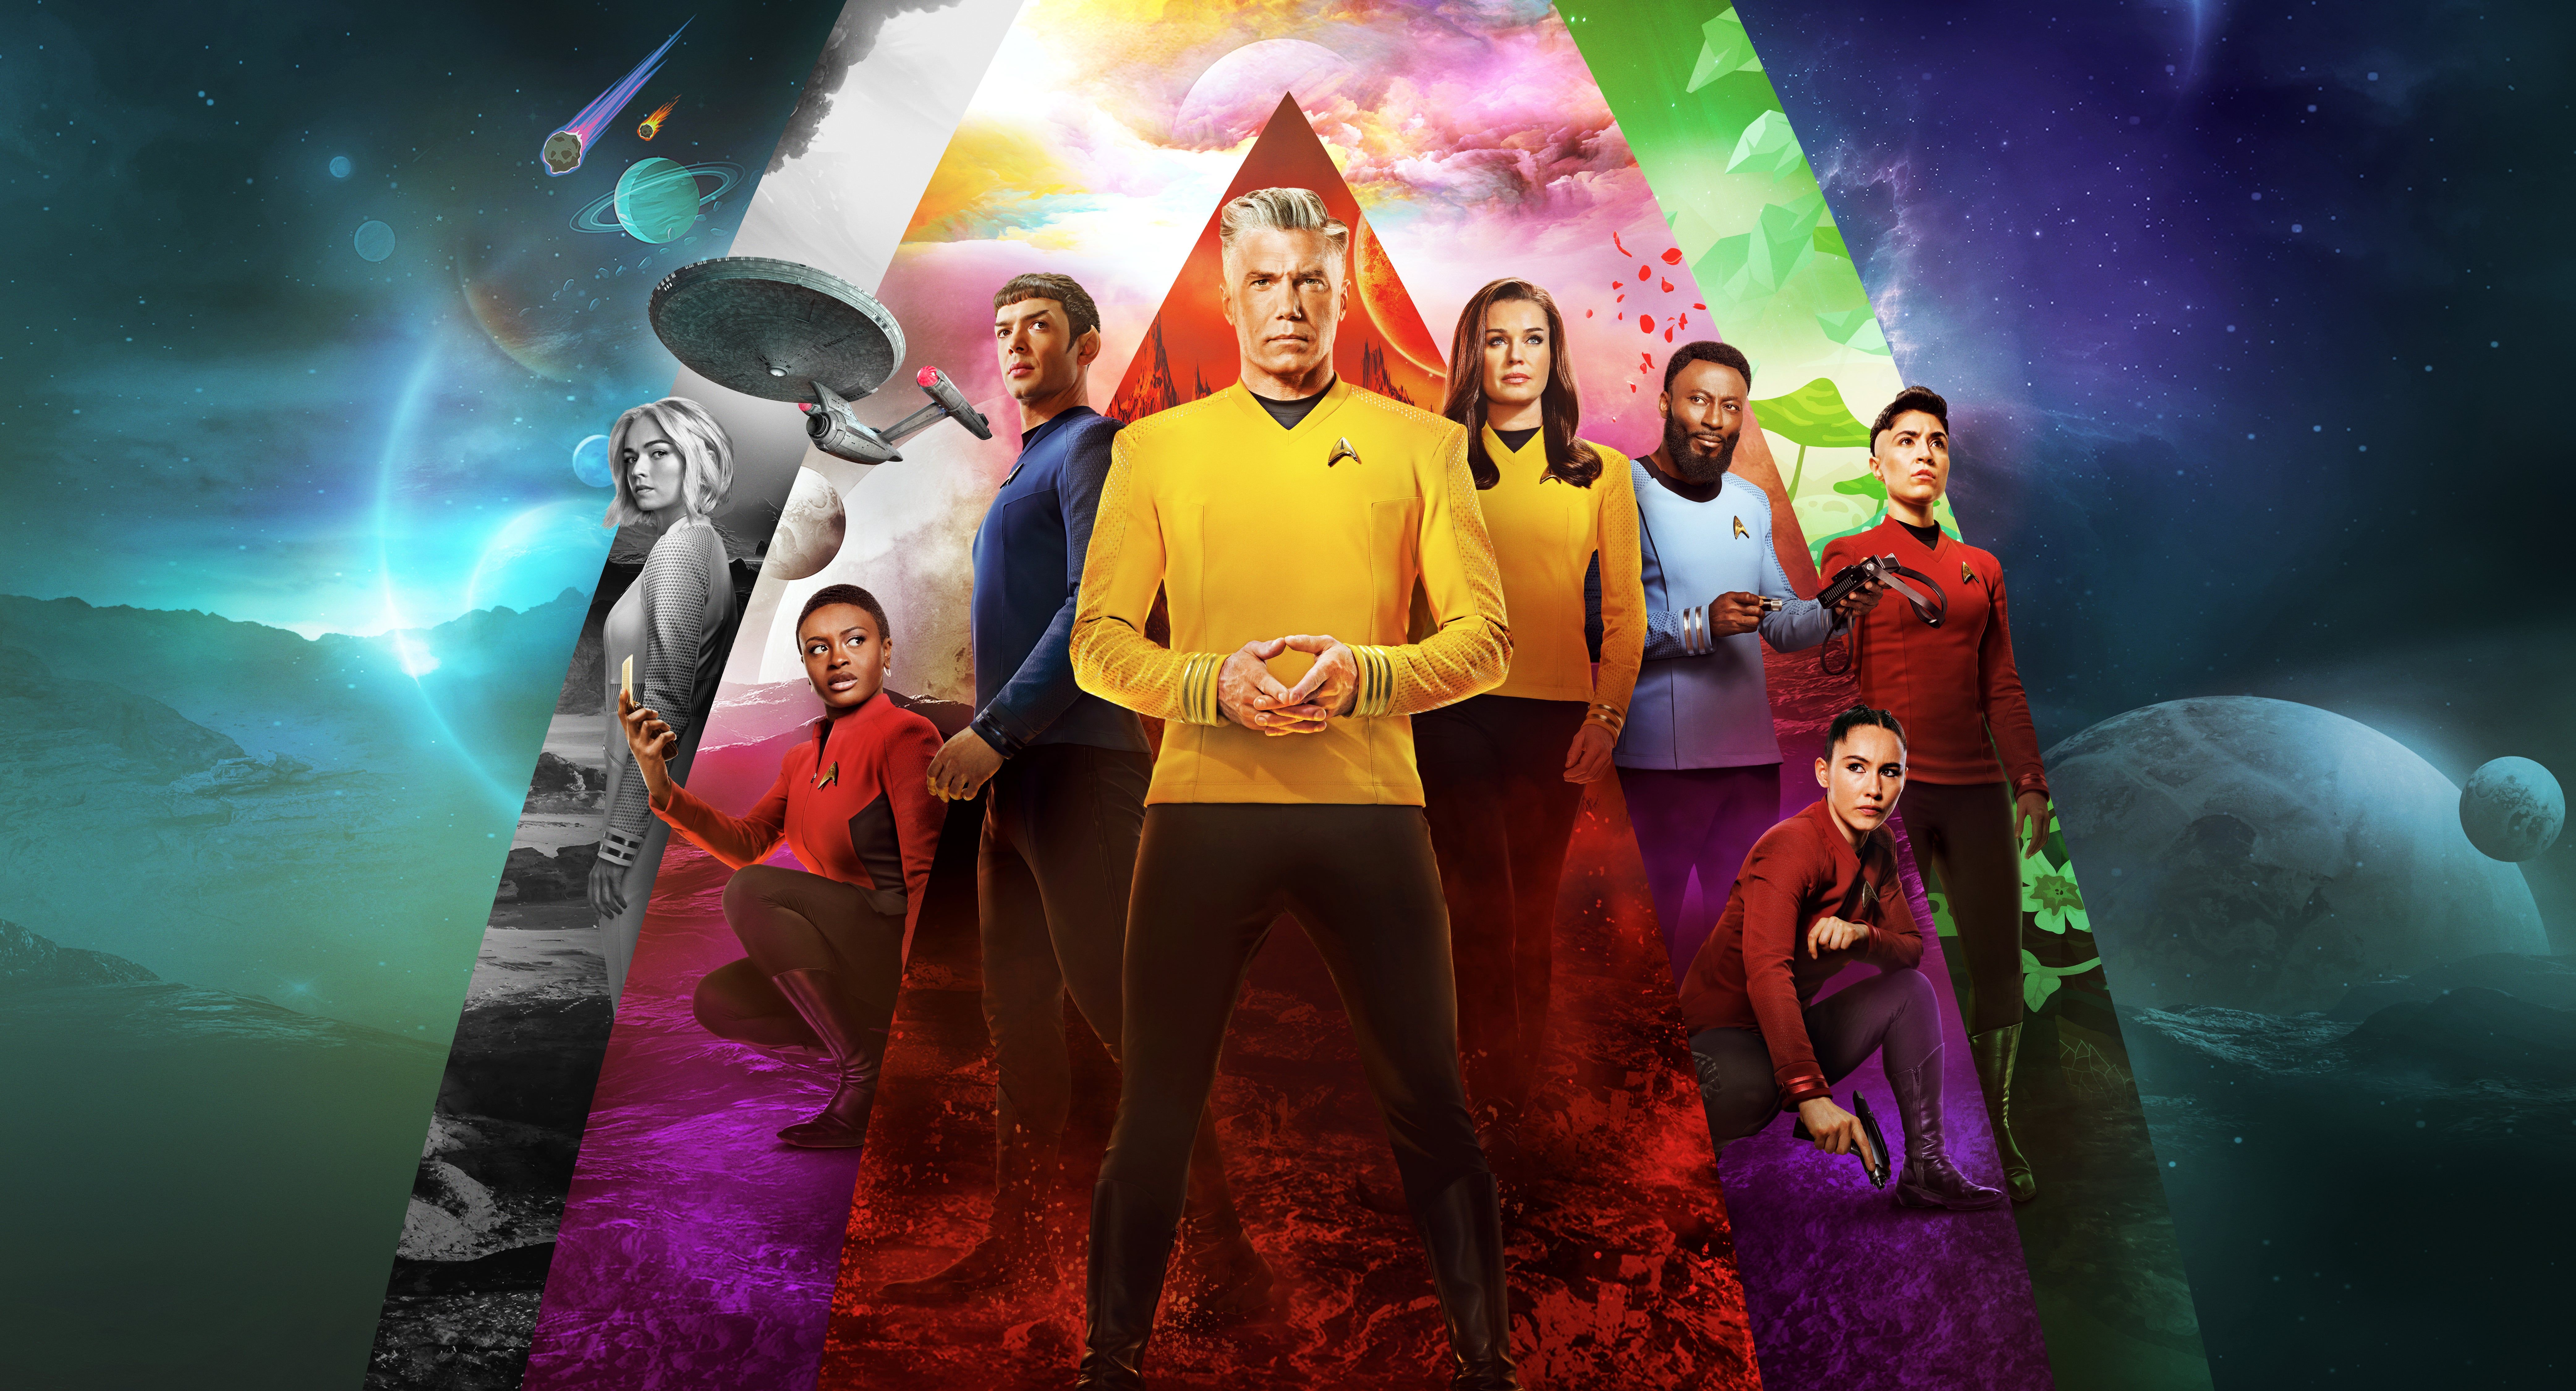 A promotional image for Star Trek: Discovery Season 3, featuring Captain Pike and the rest of the Discovery crew standing in front of a rainbow triangle. - Star Trek